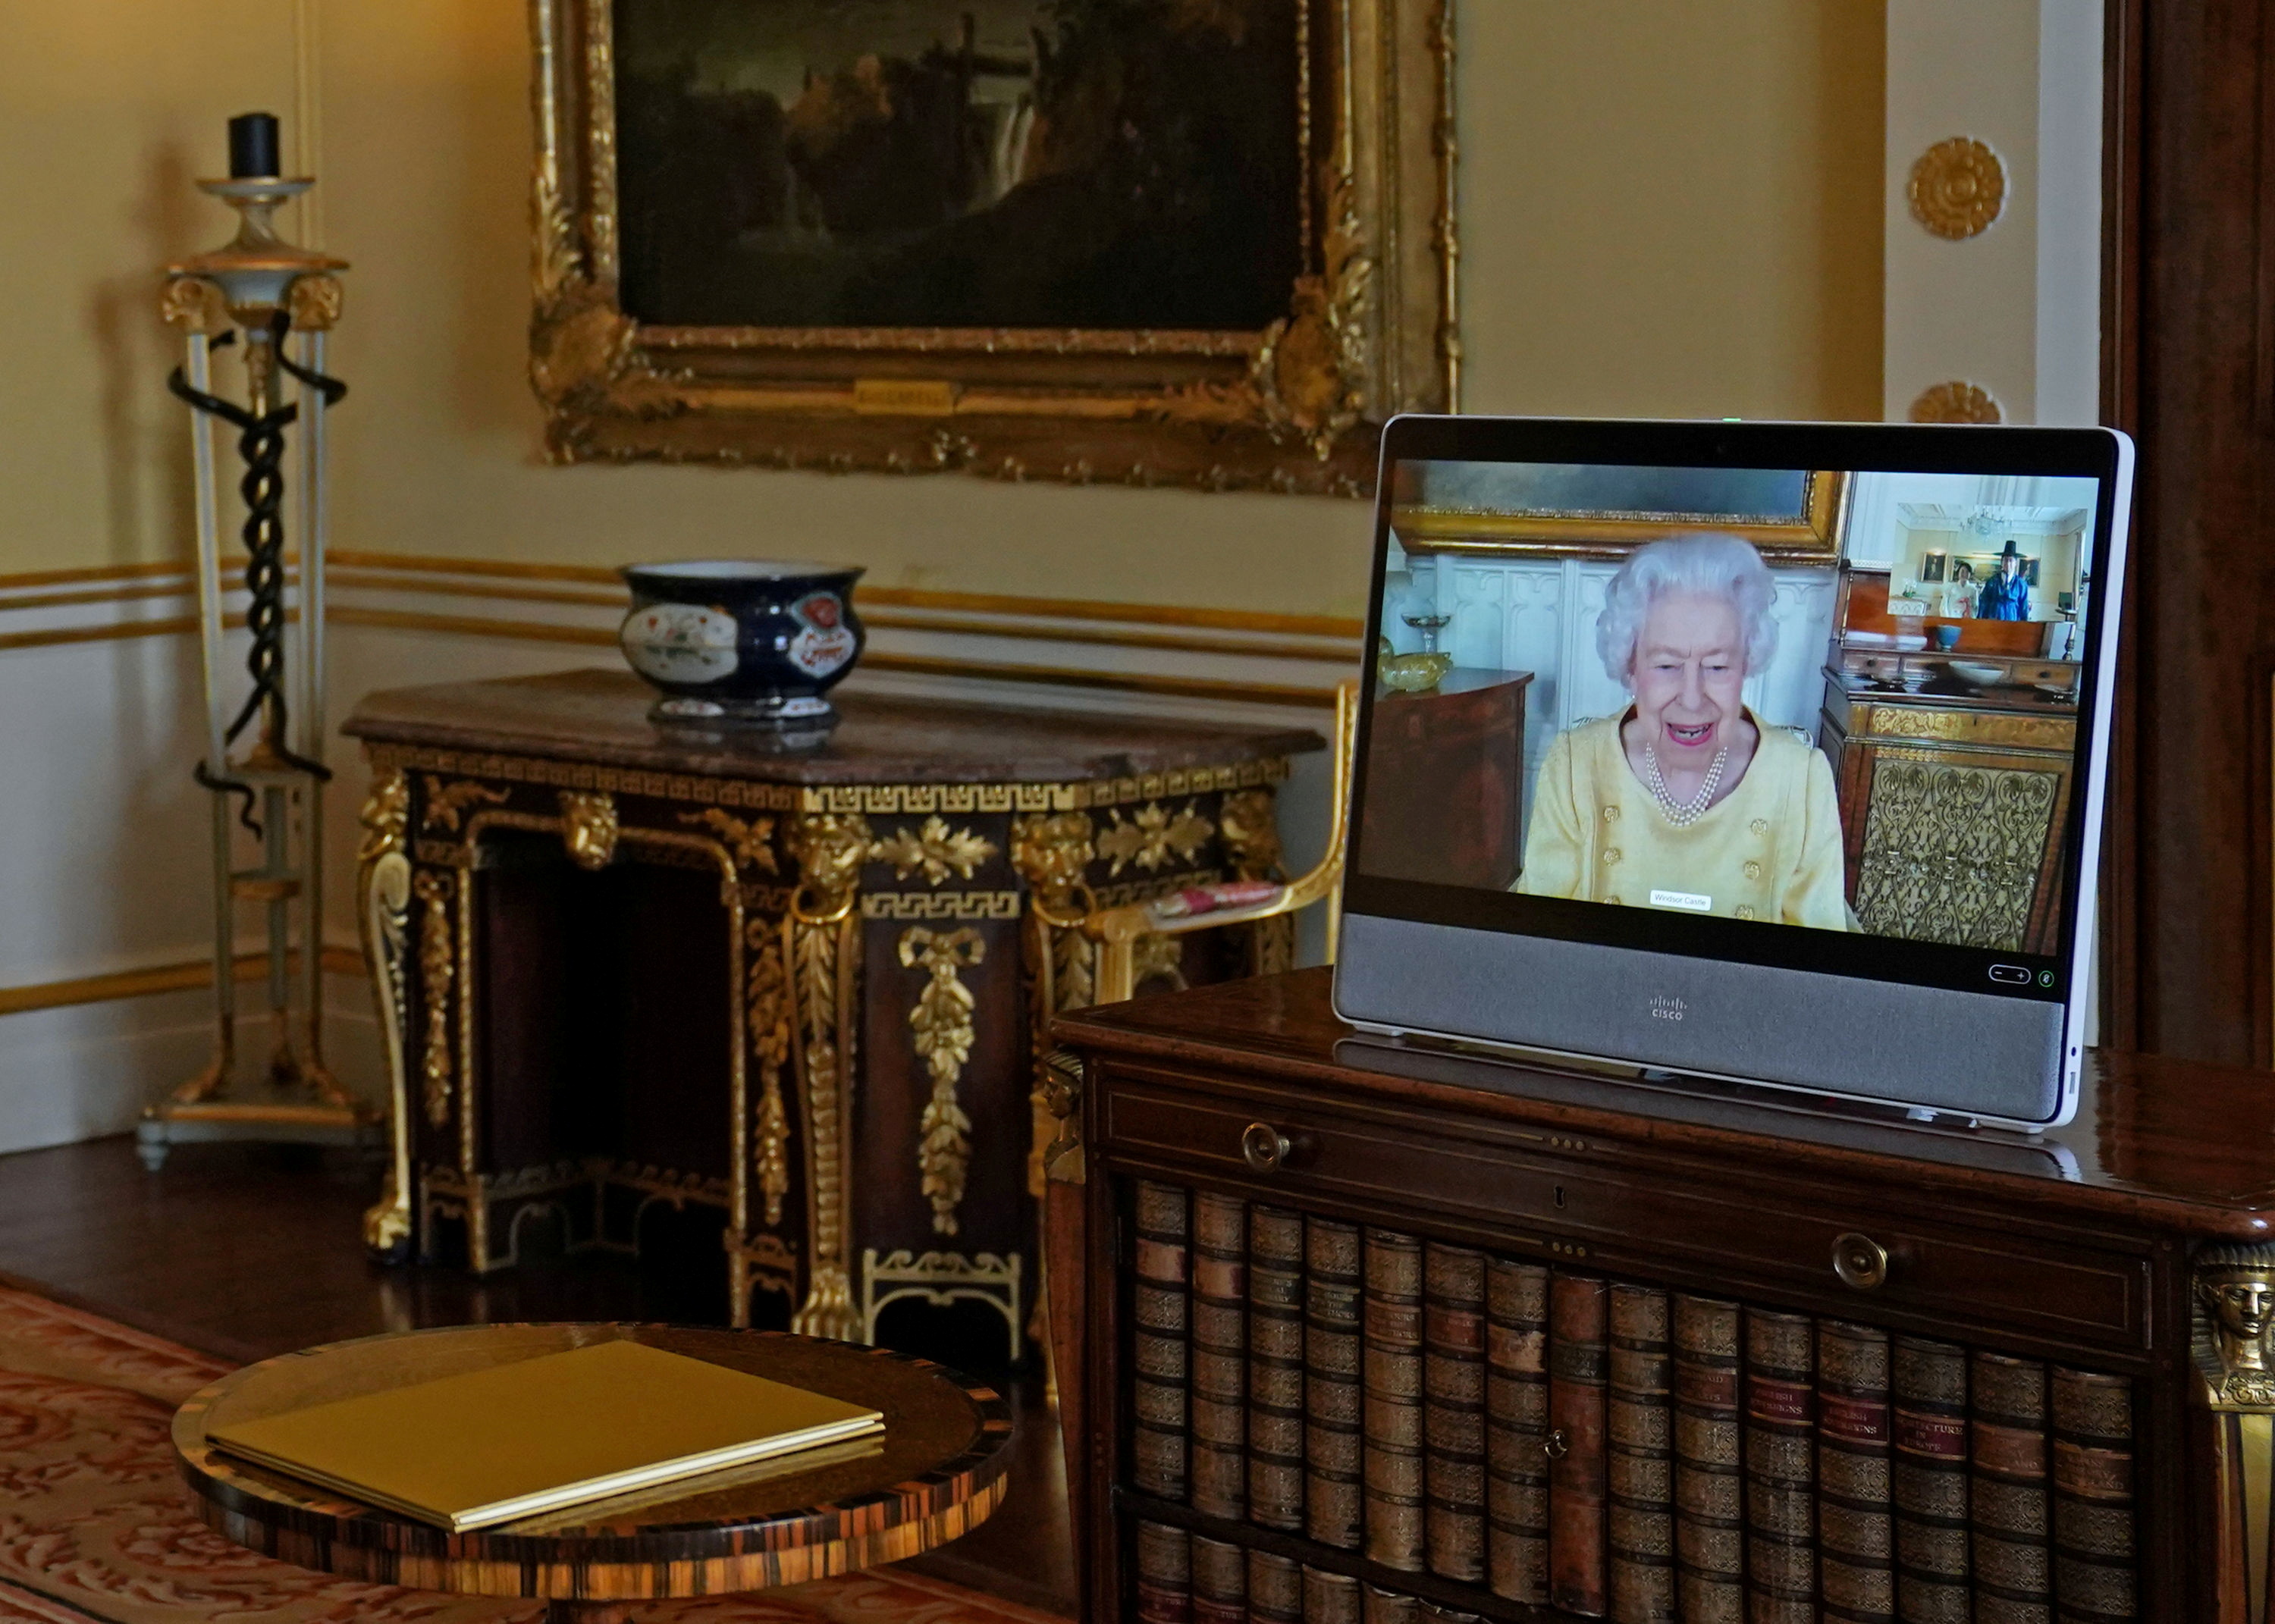 Britain's Queen Elizabeth appears on a screen via video link from Windsor Castle, where she is in residence, during a virtual audience to receive the Ambassador from the Republic of Korea, Gunn Kim, at Buckingham Palace, London, Britain, October 26, 2021. Victoria Jones/Pool via REUTERS